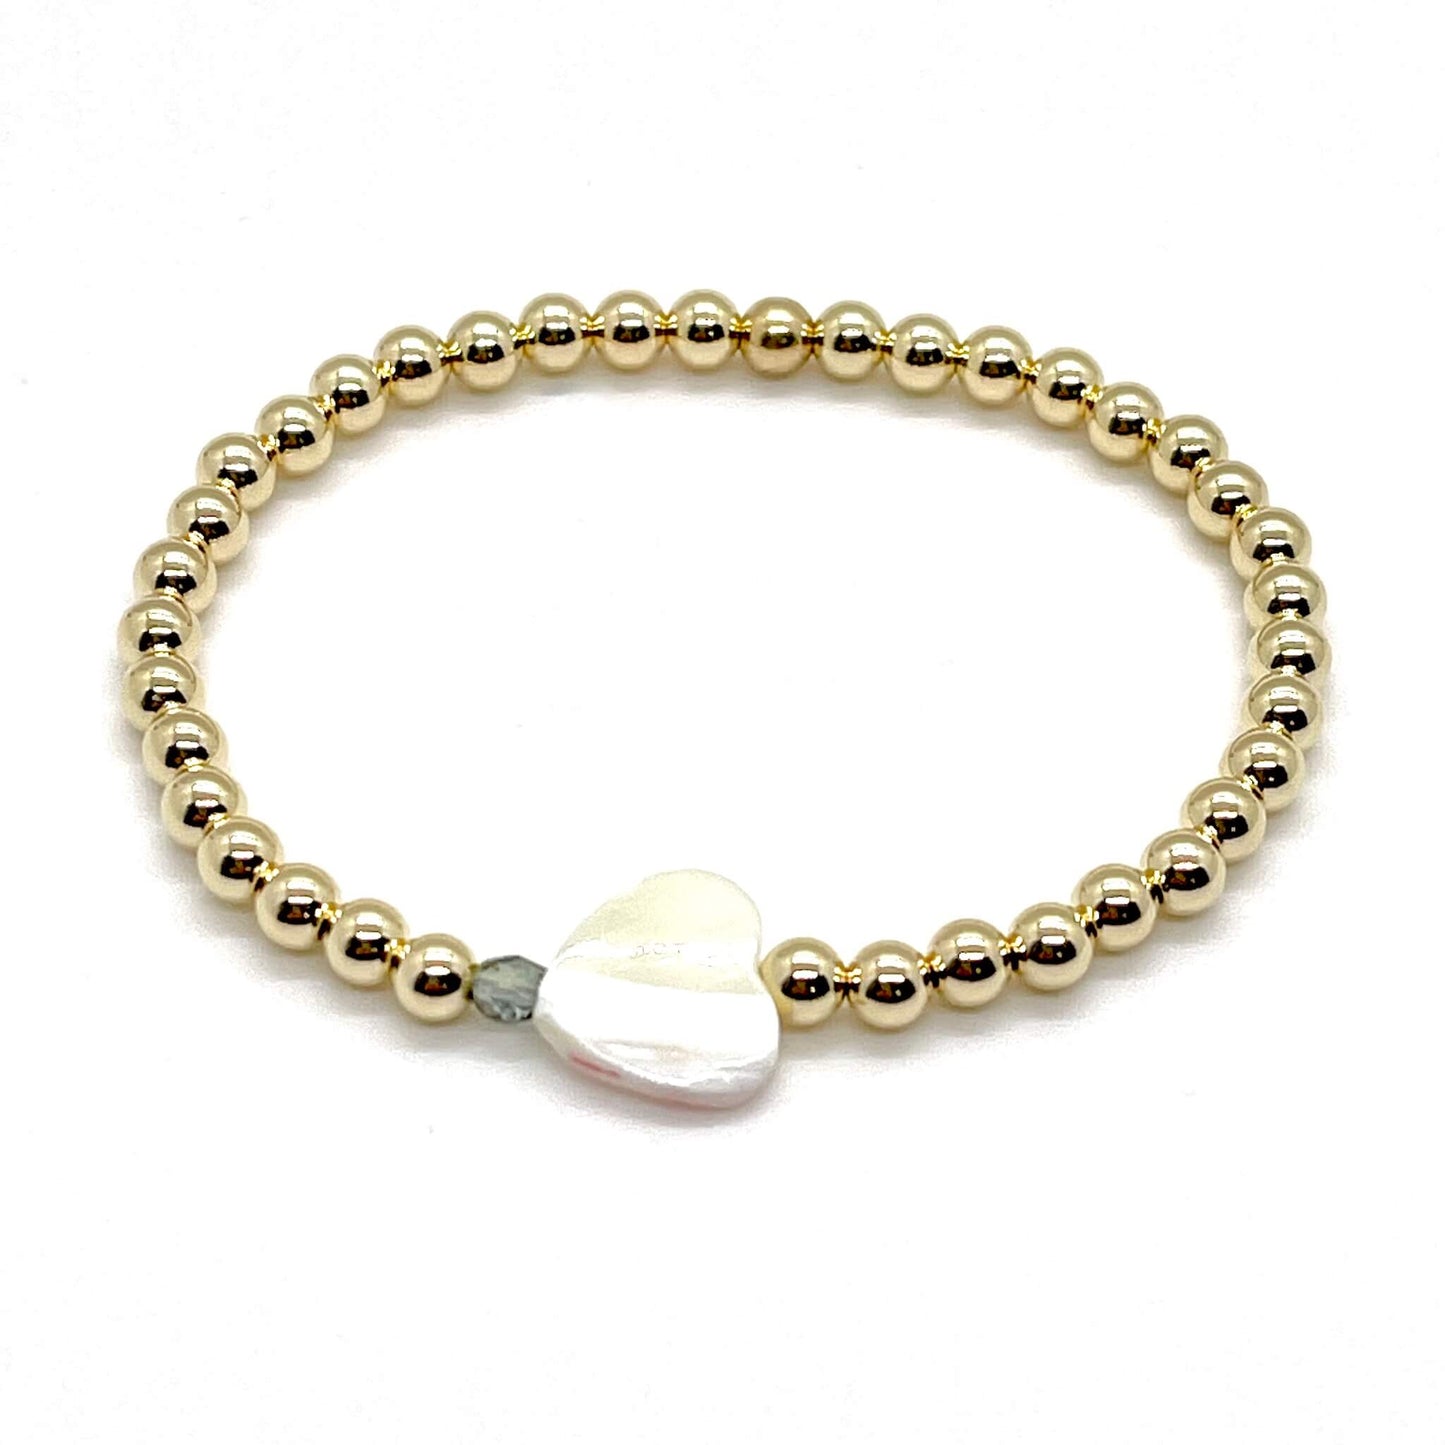 Gold heart bracelet with a mother-of-pearl heart, a small faceted green-grey crystal, and 4mm 14K gold filled beads.